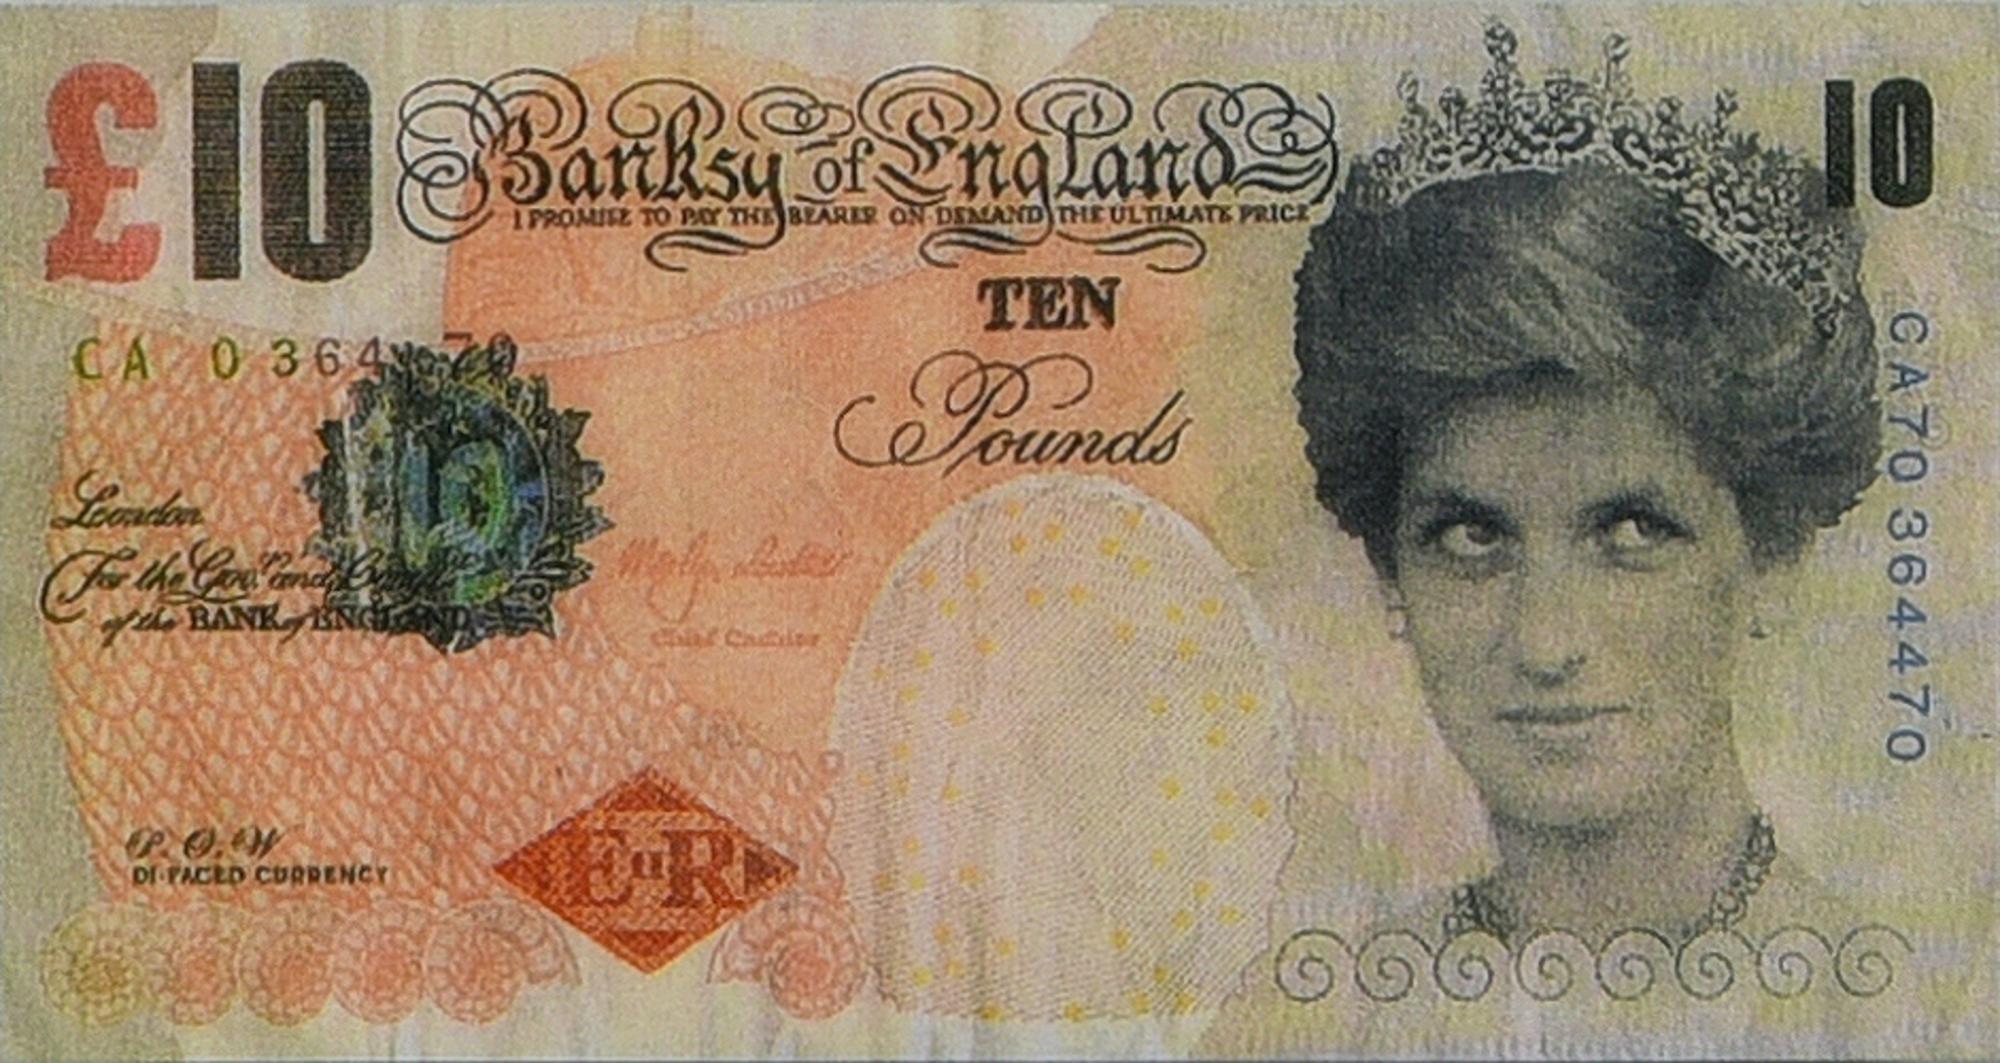 Banksy (1974) DI-FACEDTENNERS (BANKSY OF ENGLAND), 2004 stampa offset su...